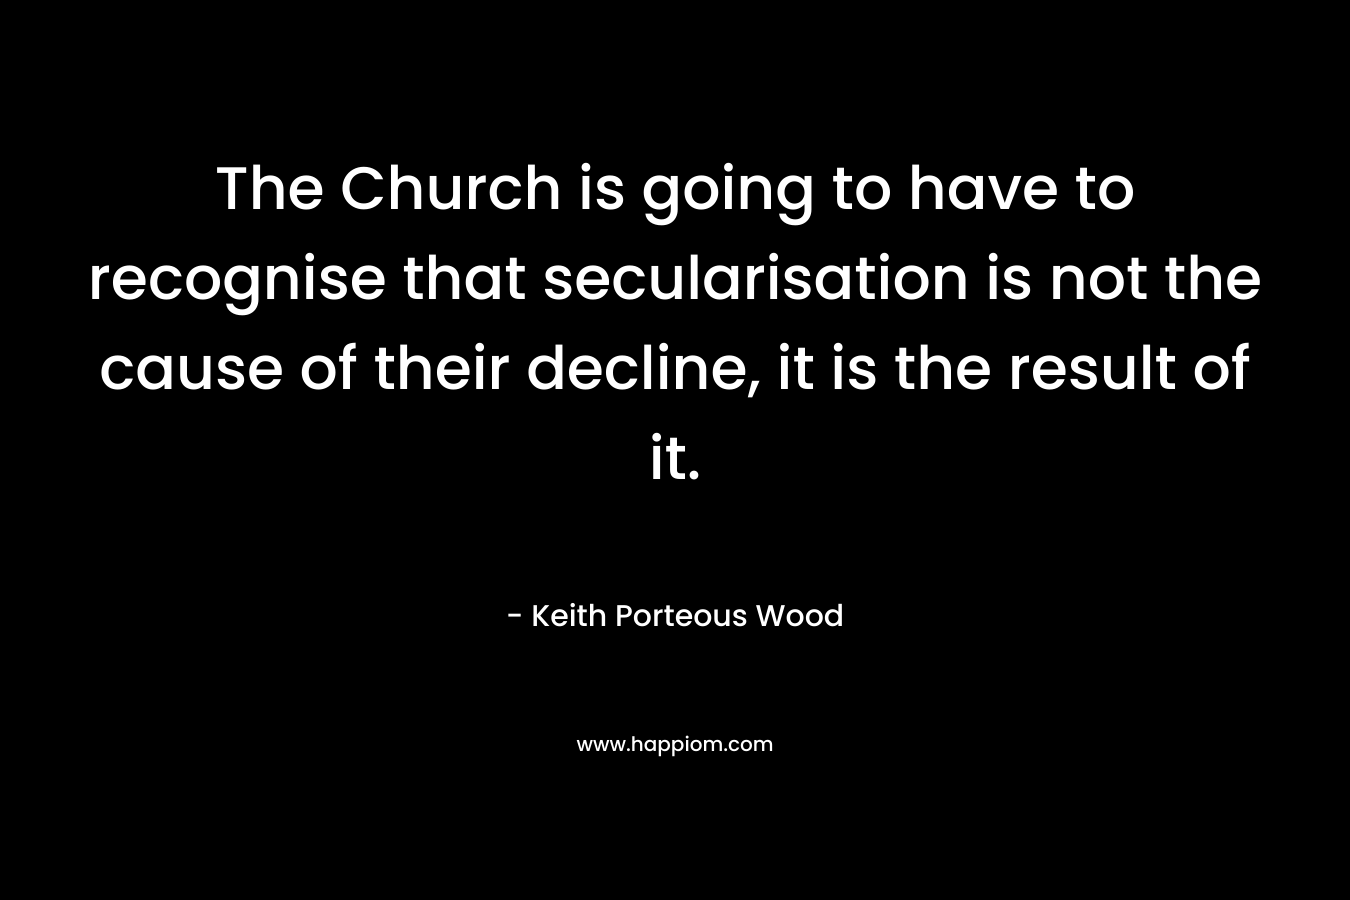 The Church is going to have to recognise that secularisation is not the cause of their decline, it is the result of it. – Keith Porteous Wood